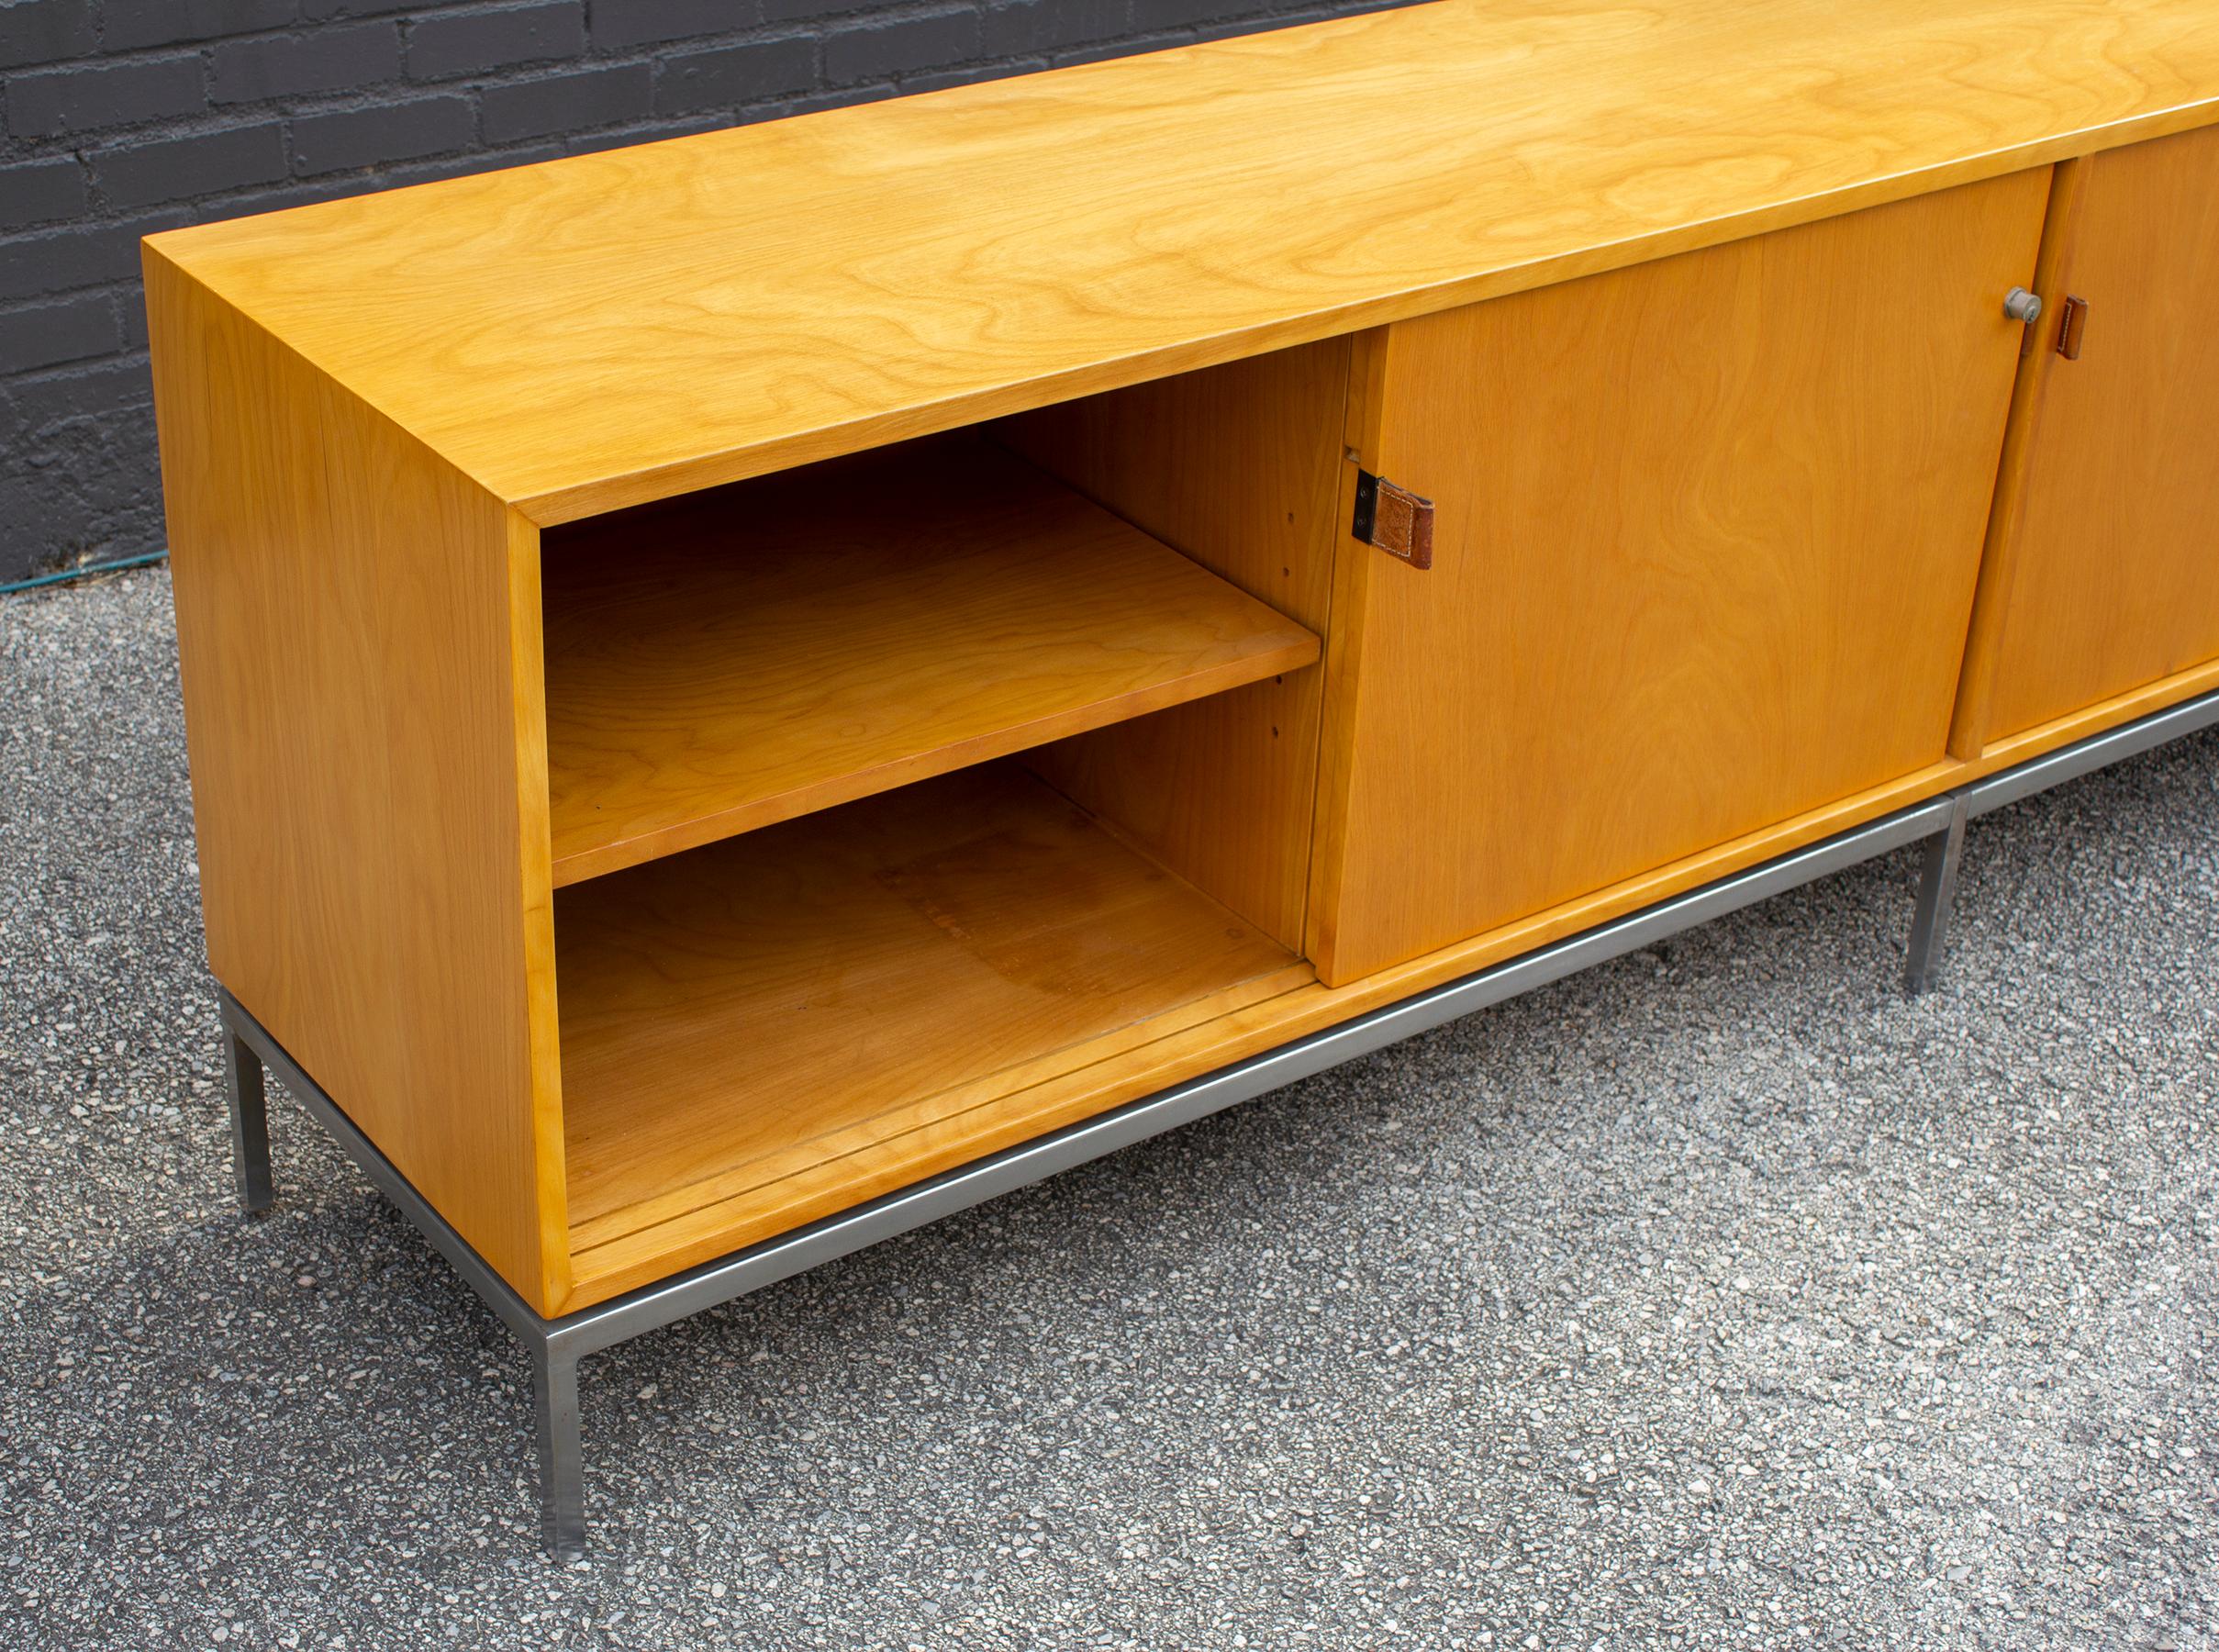 Florence Knoll Maple Credenza with Leather Pulls and Oak Drawers Early 1950s For Sale 10